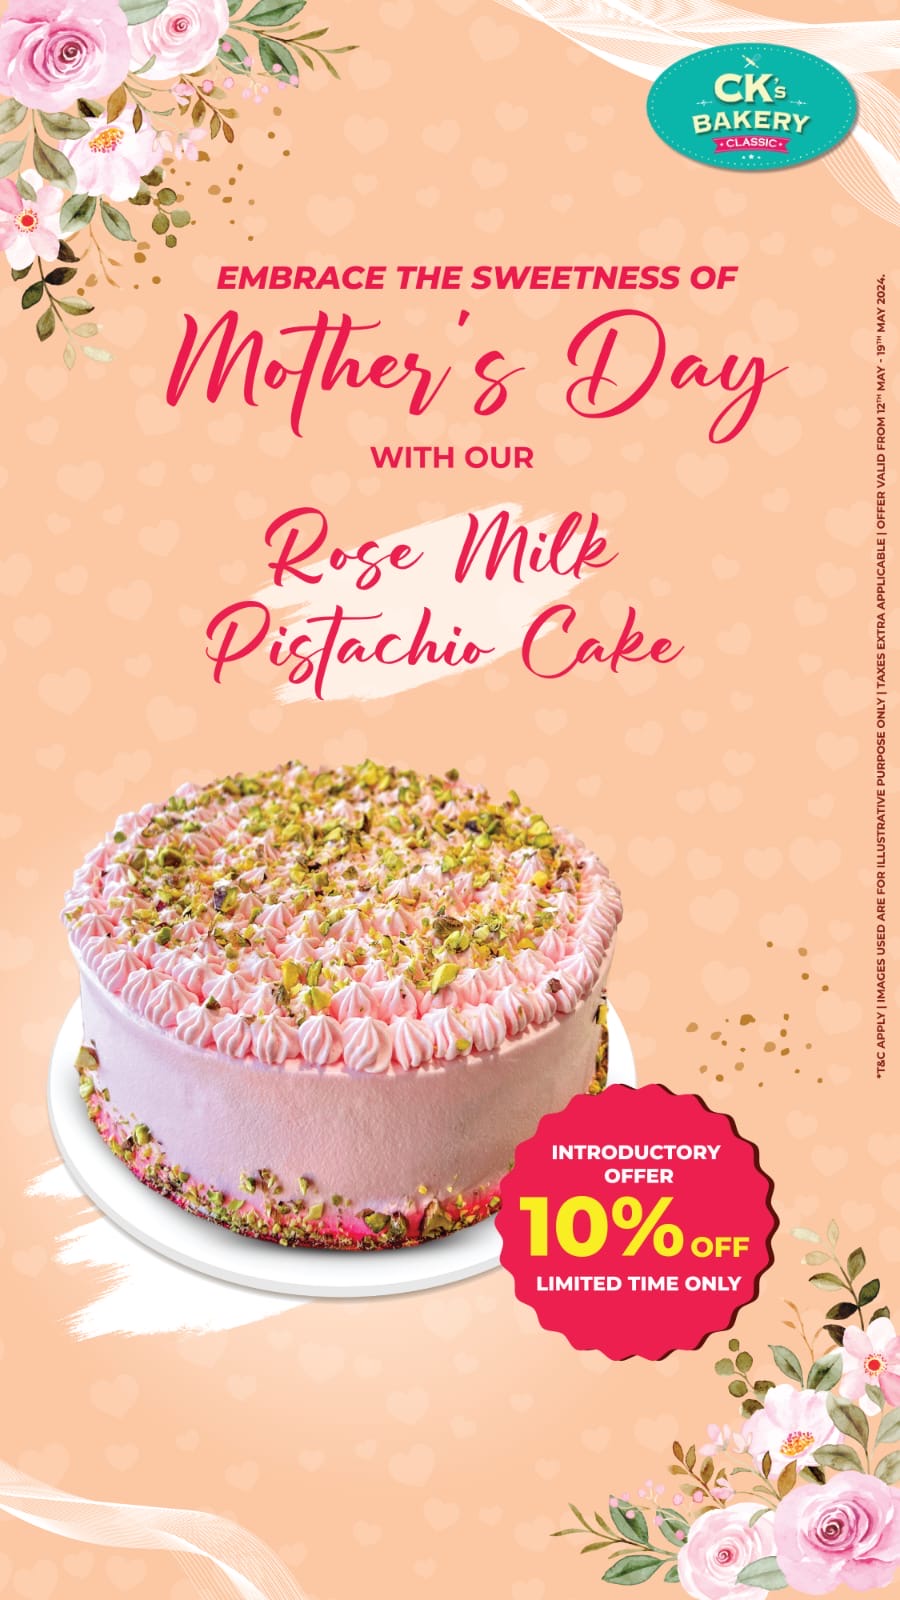 CK’s Bakery Launches brand-new Rose Milk Pistachio Cake this Mother’s Day; Rolls out Exciting Social Media Contest